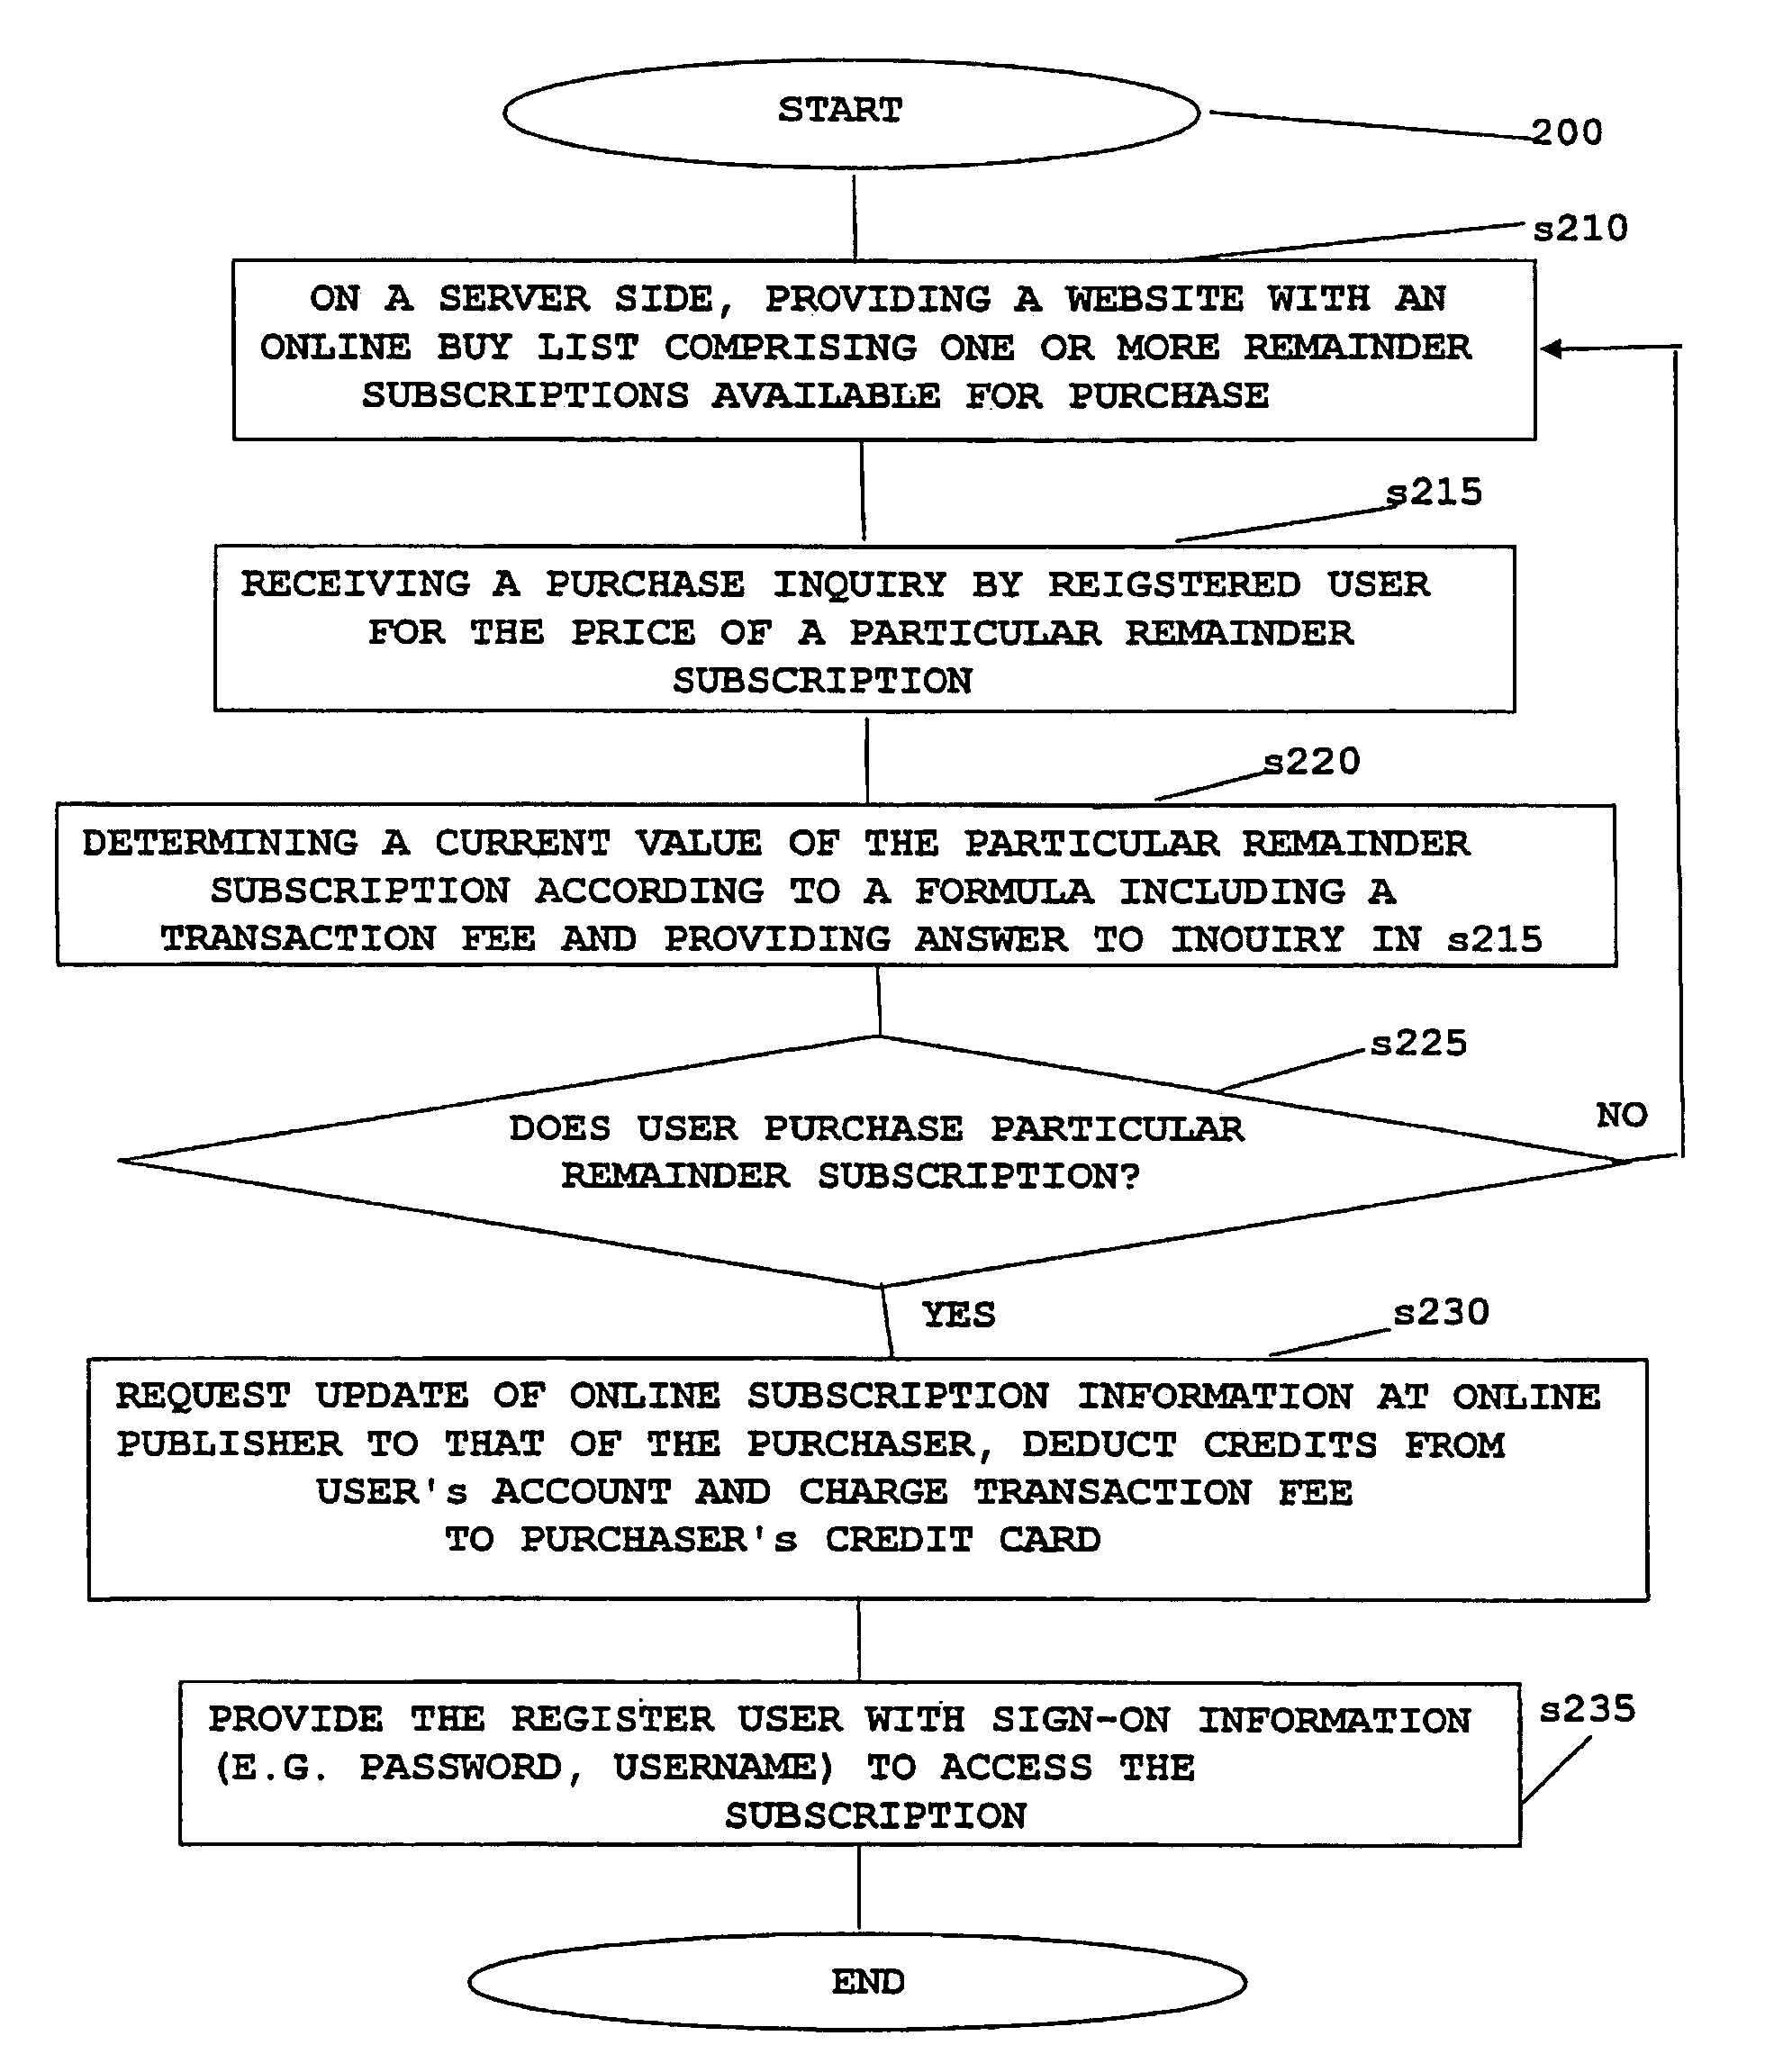 System and Method for Purchasing and Reselling Online and Offline Subscriptions, Service Contracts and Memberships and Paid Website Access